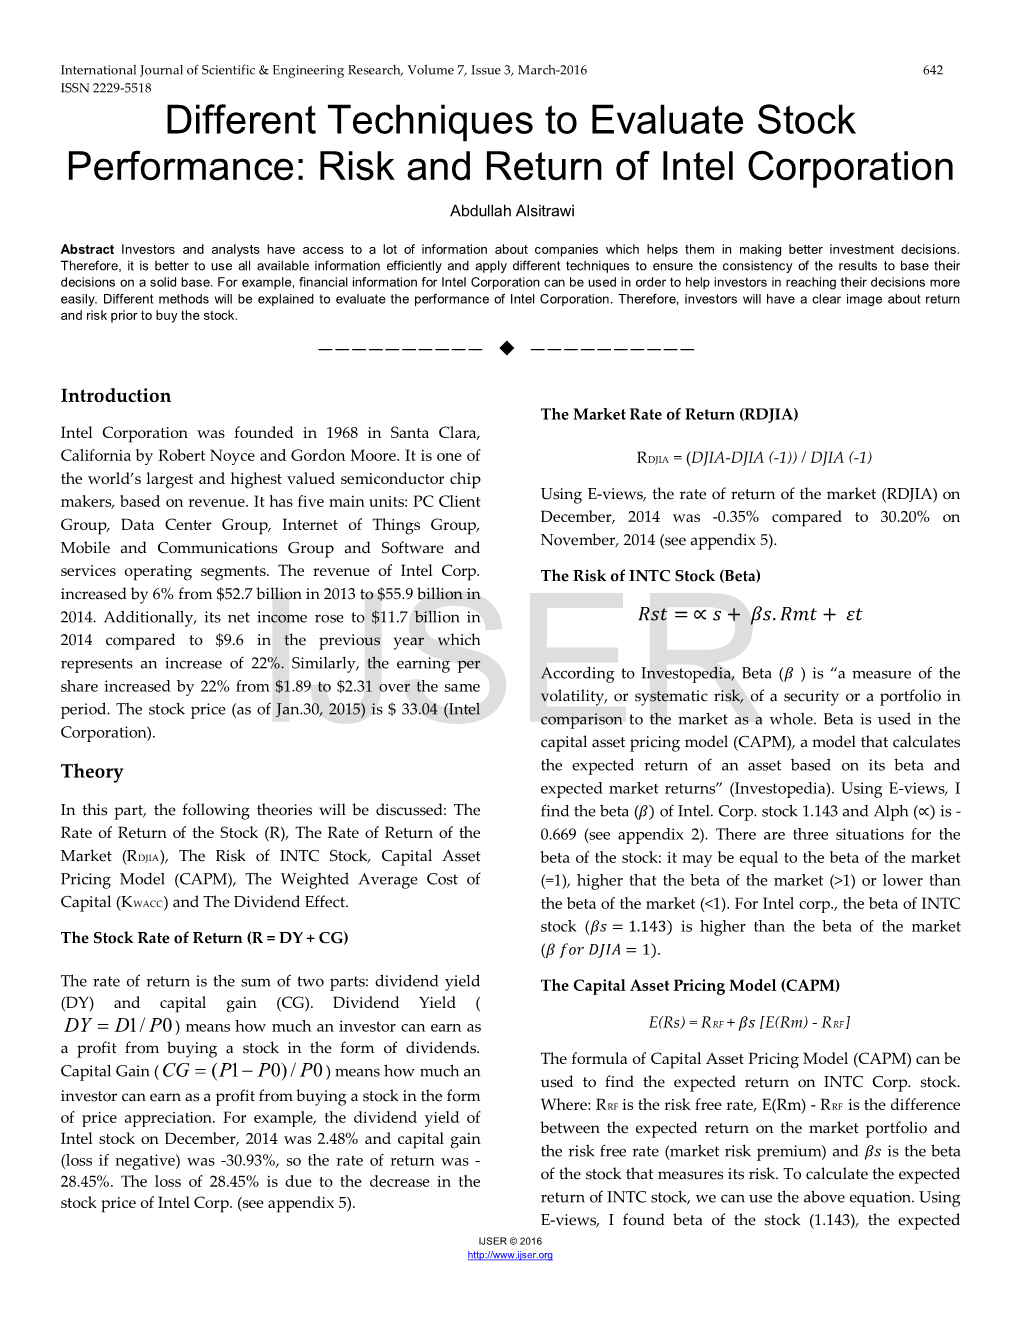 Different Techniques to Evaluate Stock Performance: Risk and Return of Intel Corporation Abdullah Alsitrawi